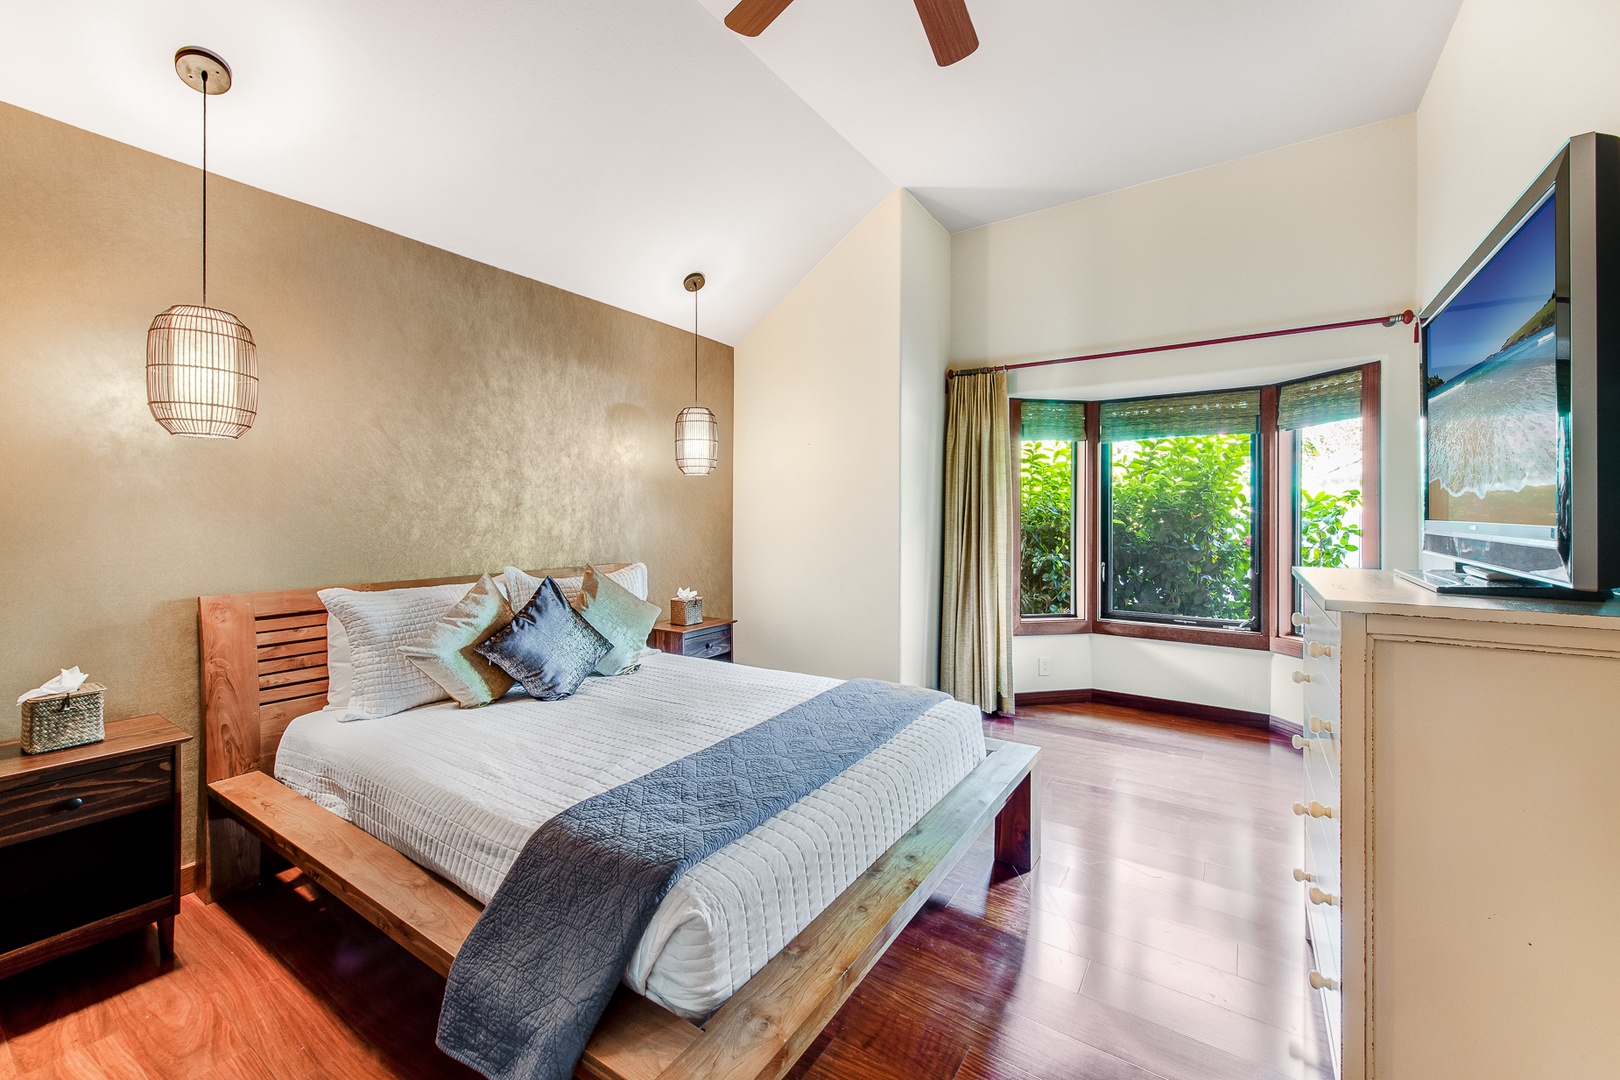 Kamuela Vacation Rentals, Olomana Hale at Kohala Ranch - This bedroom is equipped with split AC and a ceiling fan